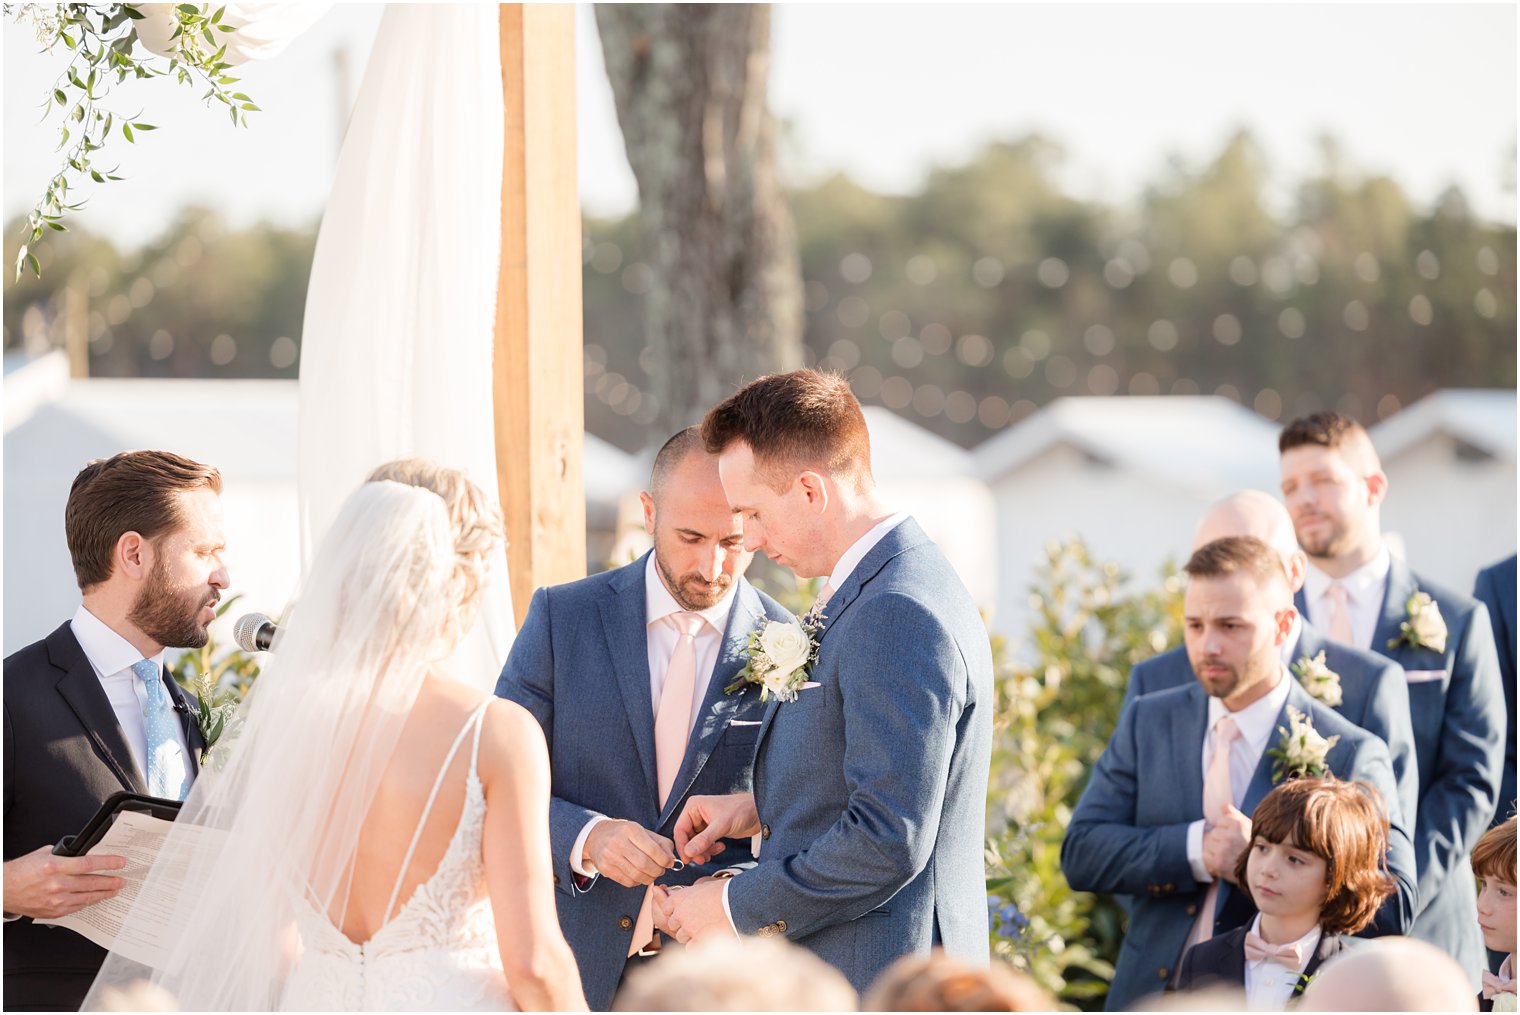 ring exchange during outdoor ceremony at Renault Winery in Egg Harbor Township, NJ